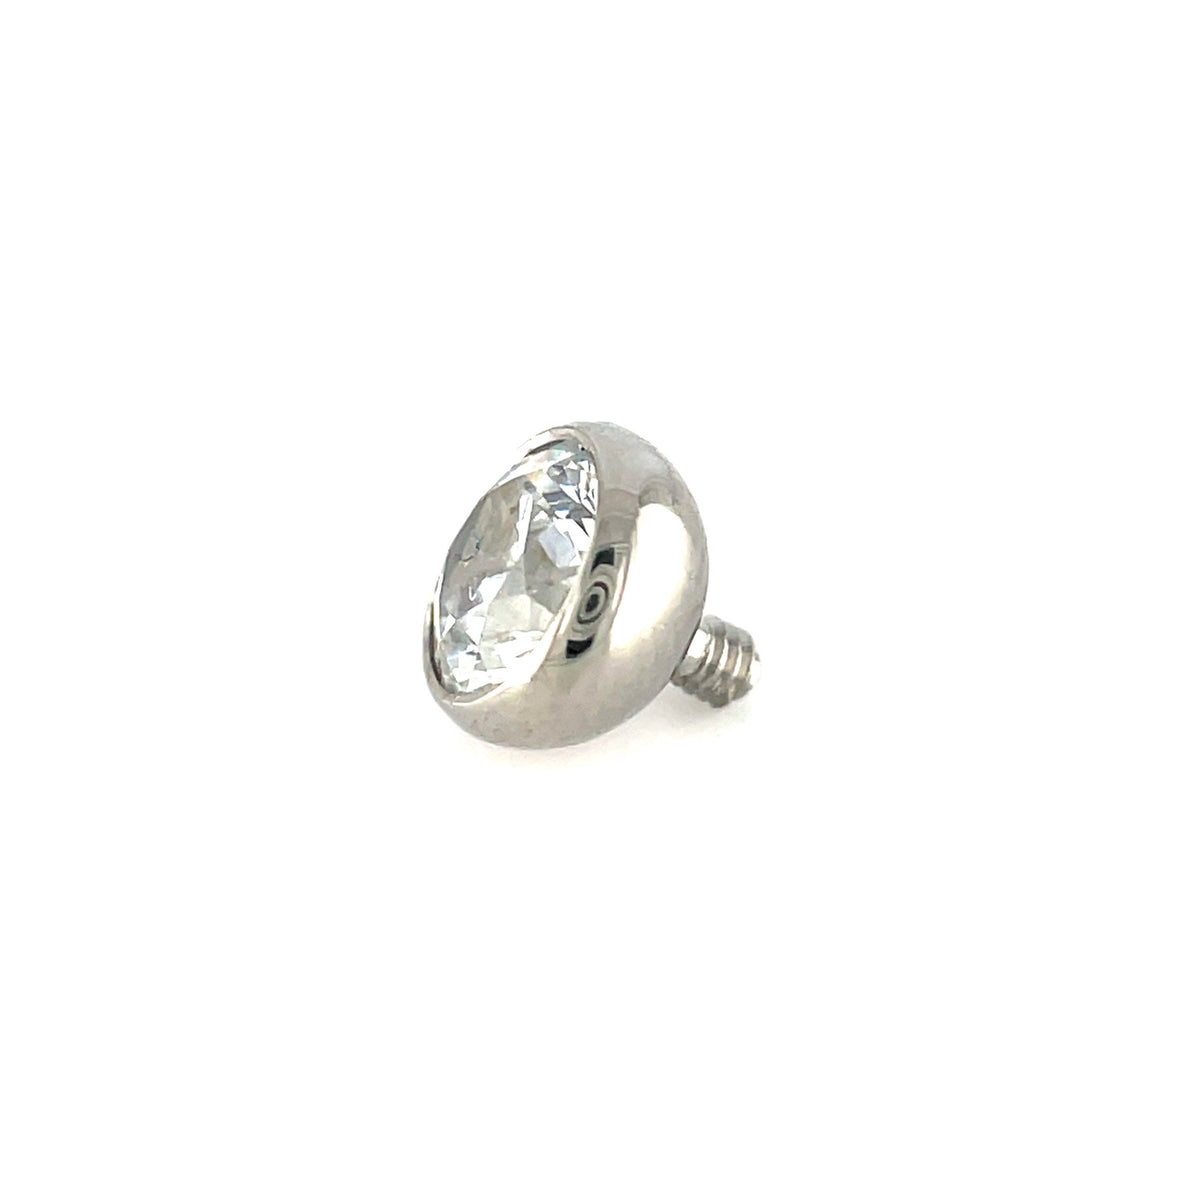 Industrial Strength Low Profile White CZ Gem Ball